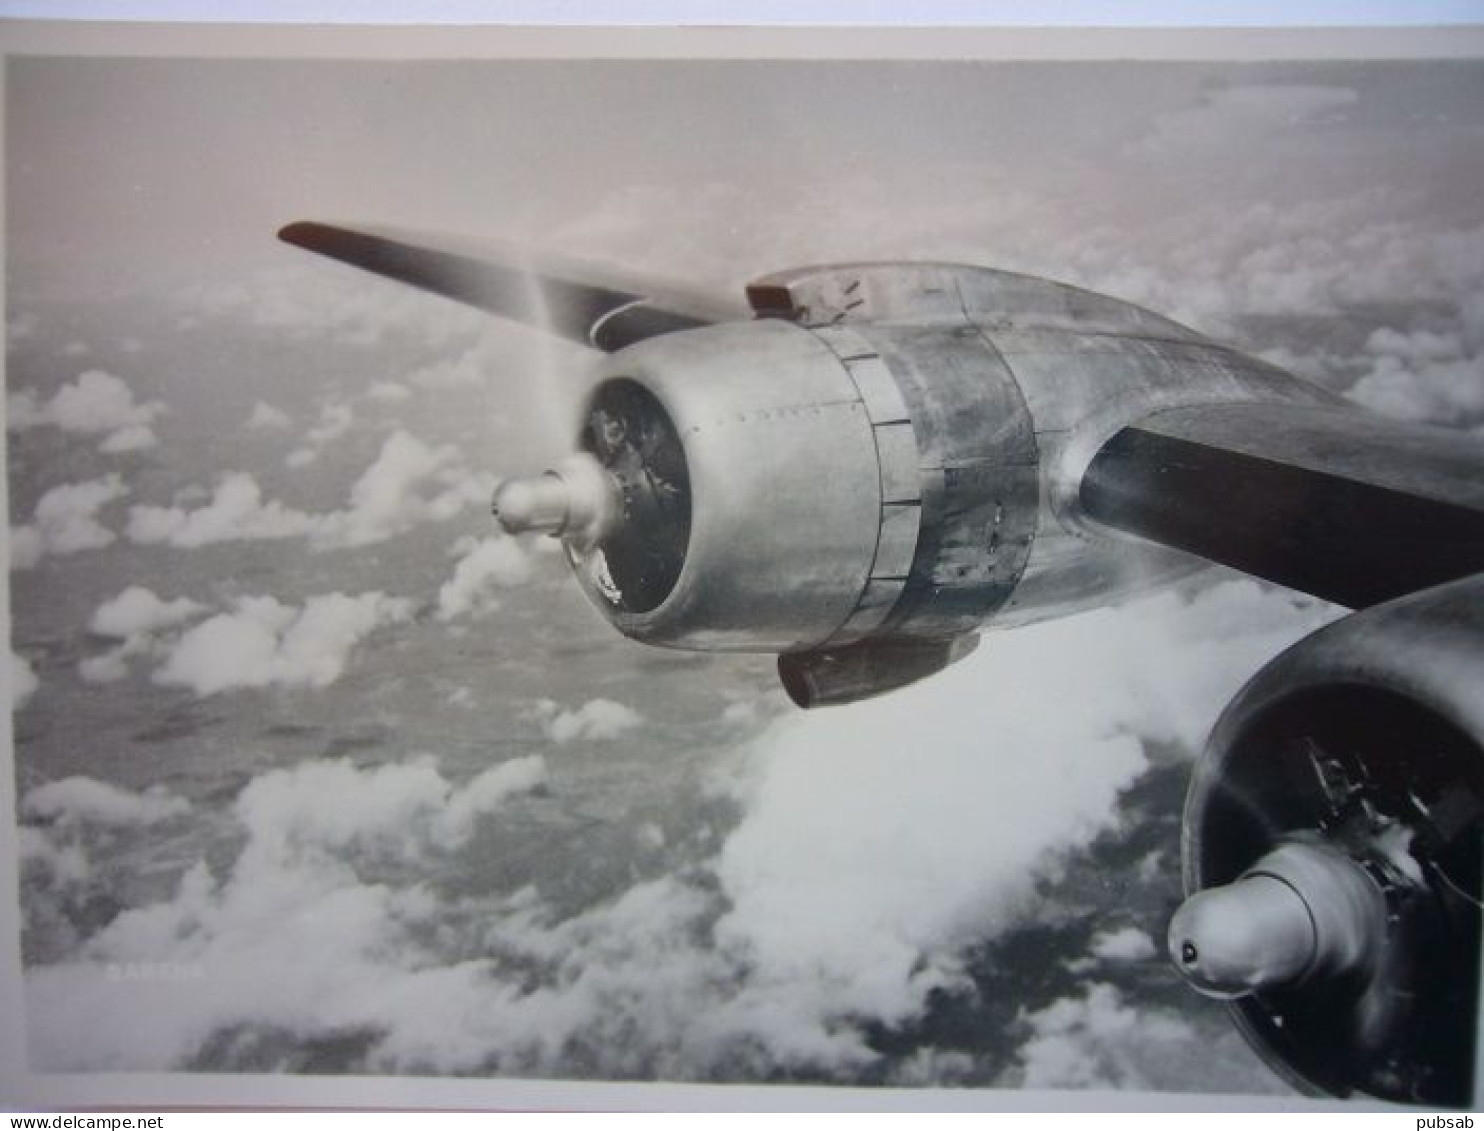 Avion / Airplane / SABENA / Douglas DC-6 / Above The Clouds / Airline Issue - 1946-....: Moderne